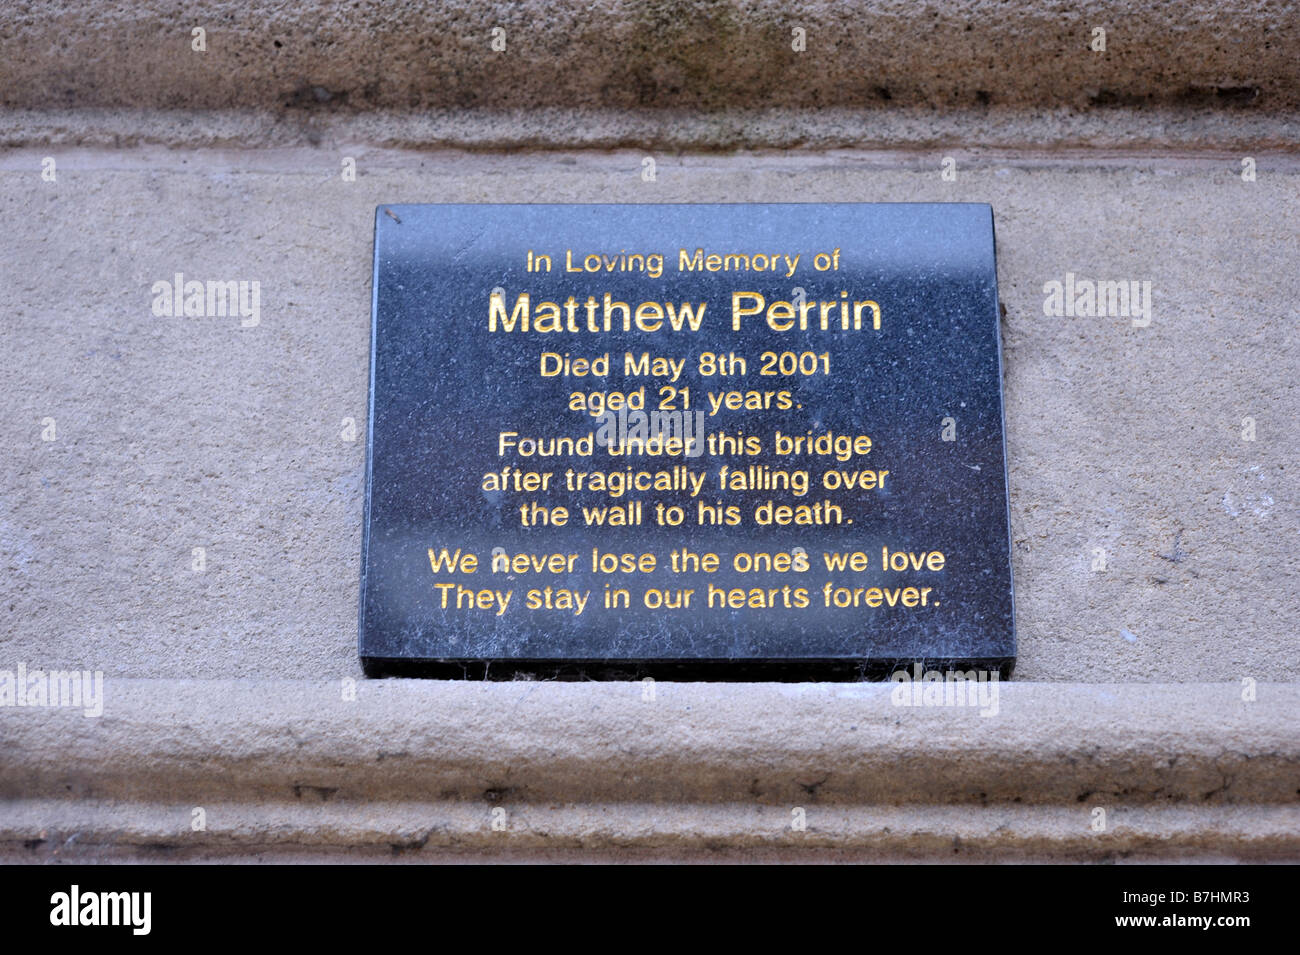 Matthew Perrin memorial plaque canal street manchester accidental death 2001 Stock Photo